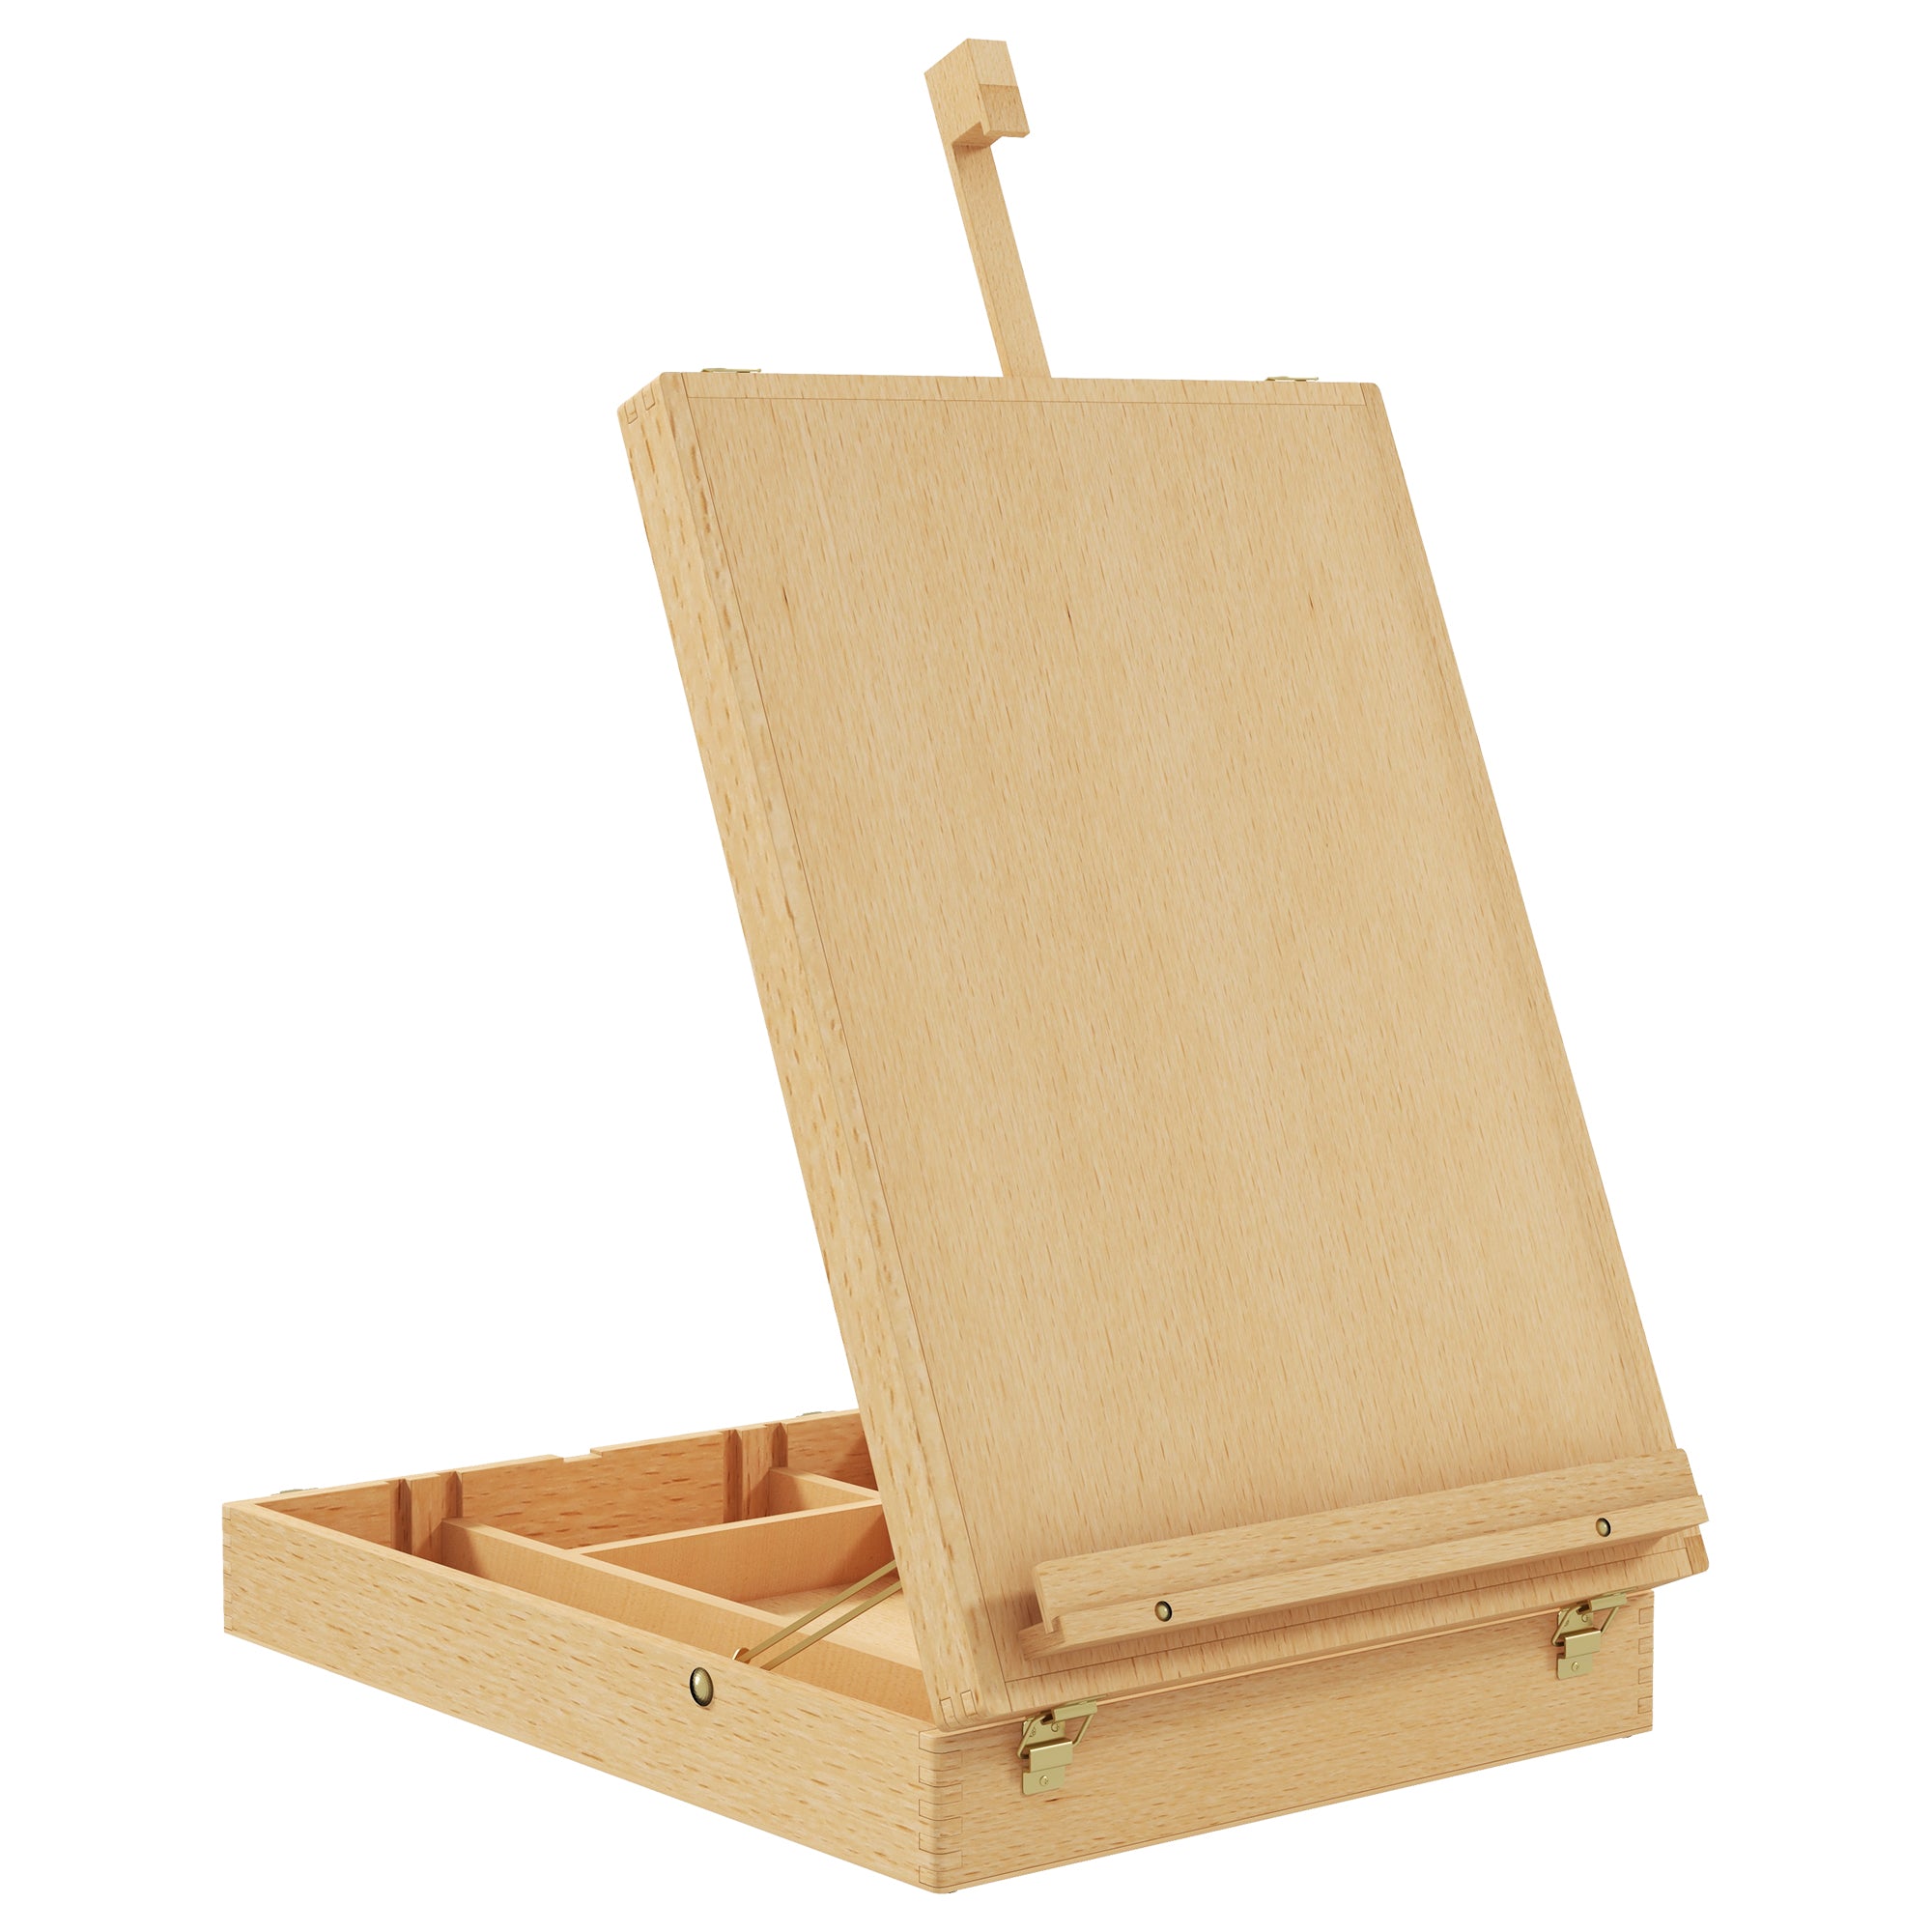 Vinsetto Wooden Table Easel Box Hold Canvas up to 61cm - Adjustable Beechwood Storage Table Box Easel - Portable Folding Artist Drawing & Sketching Bo